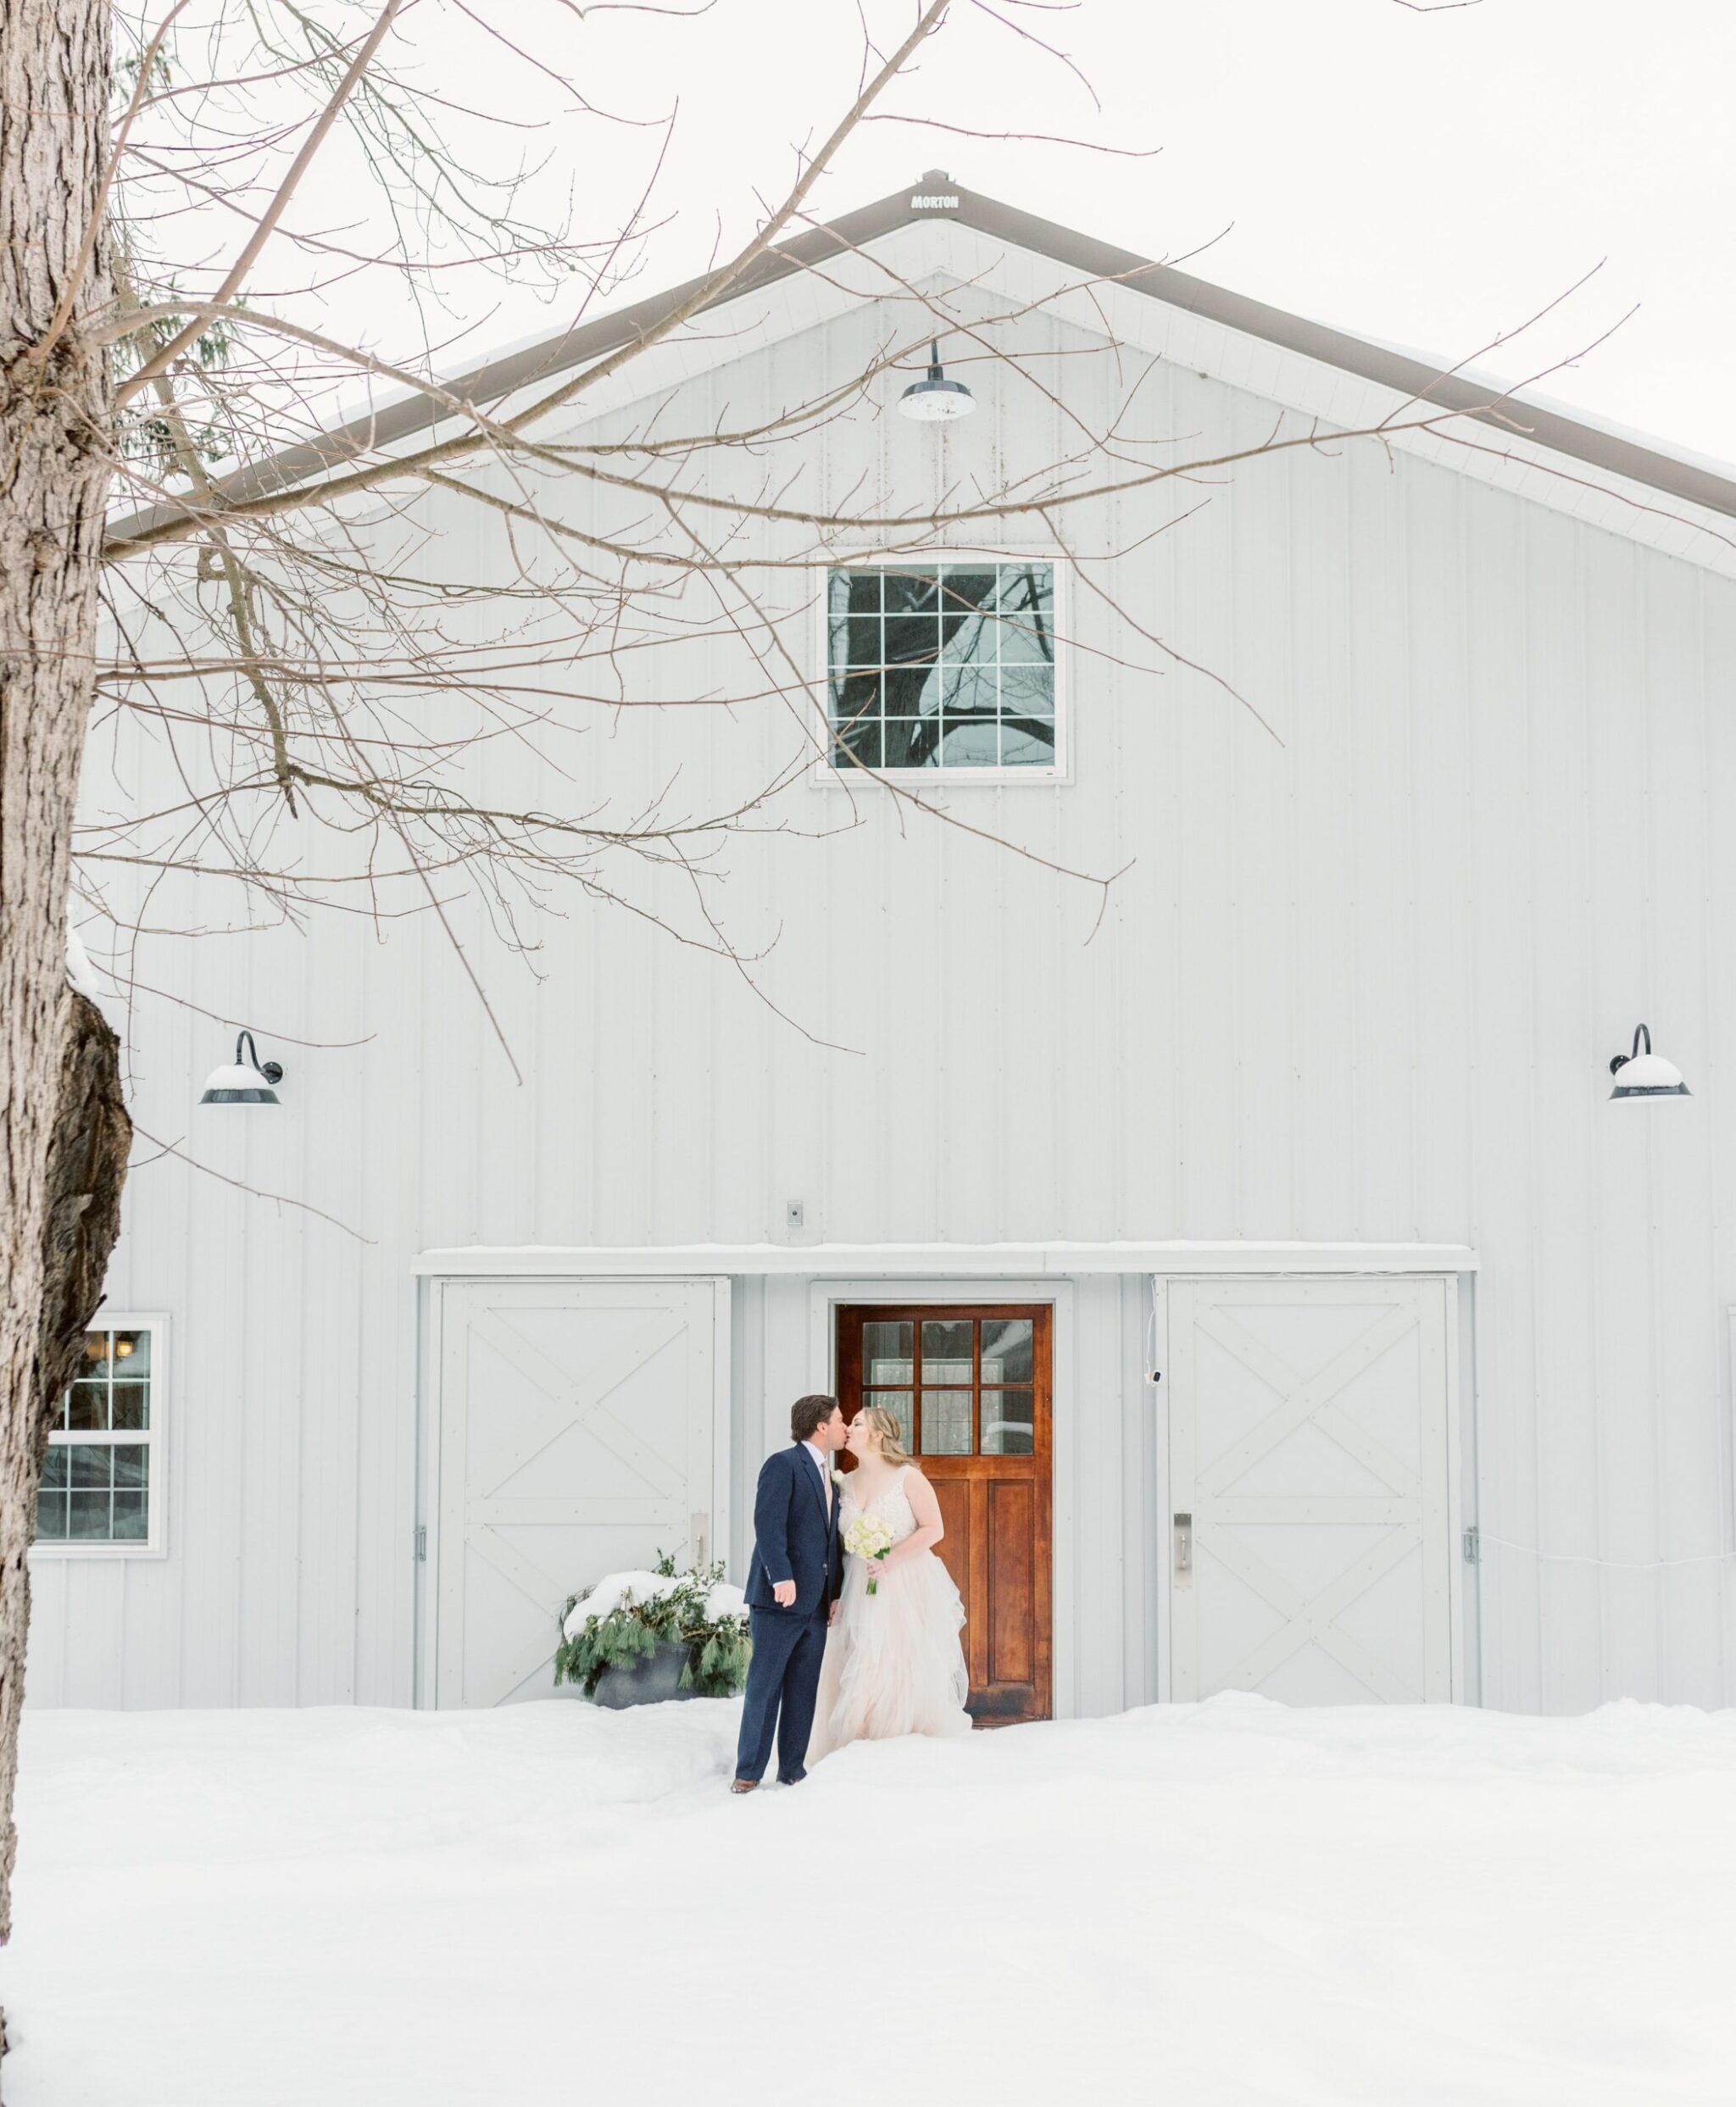 A couple kisses in the snow on their wedding day in front of The Barn.